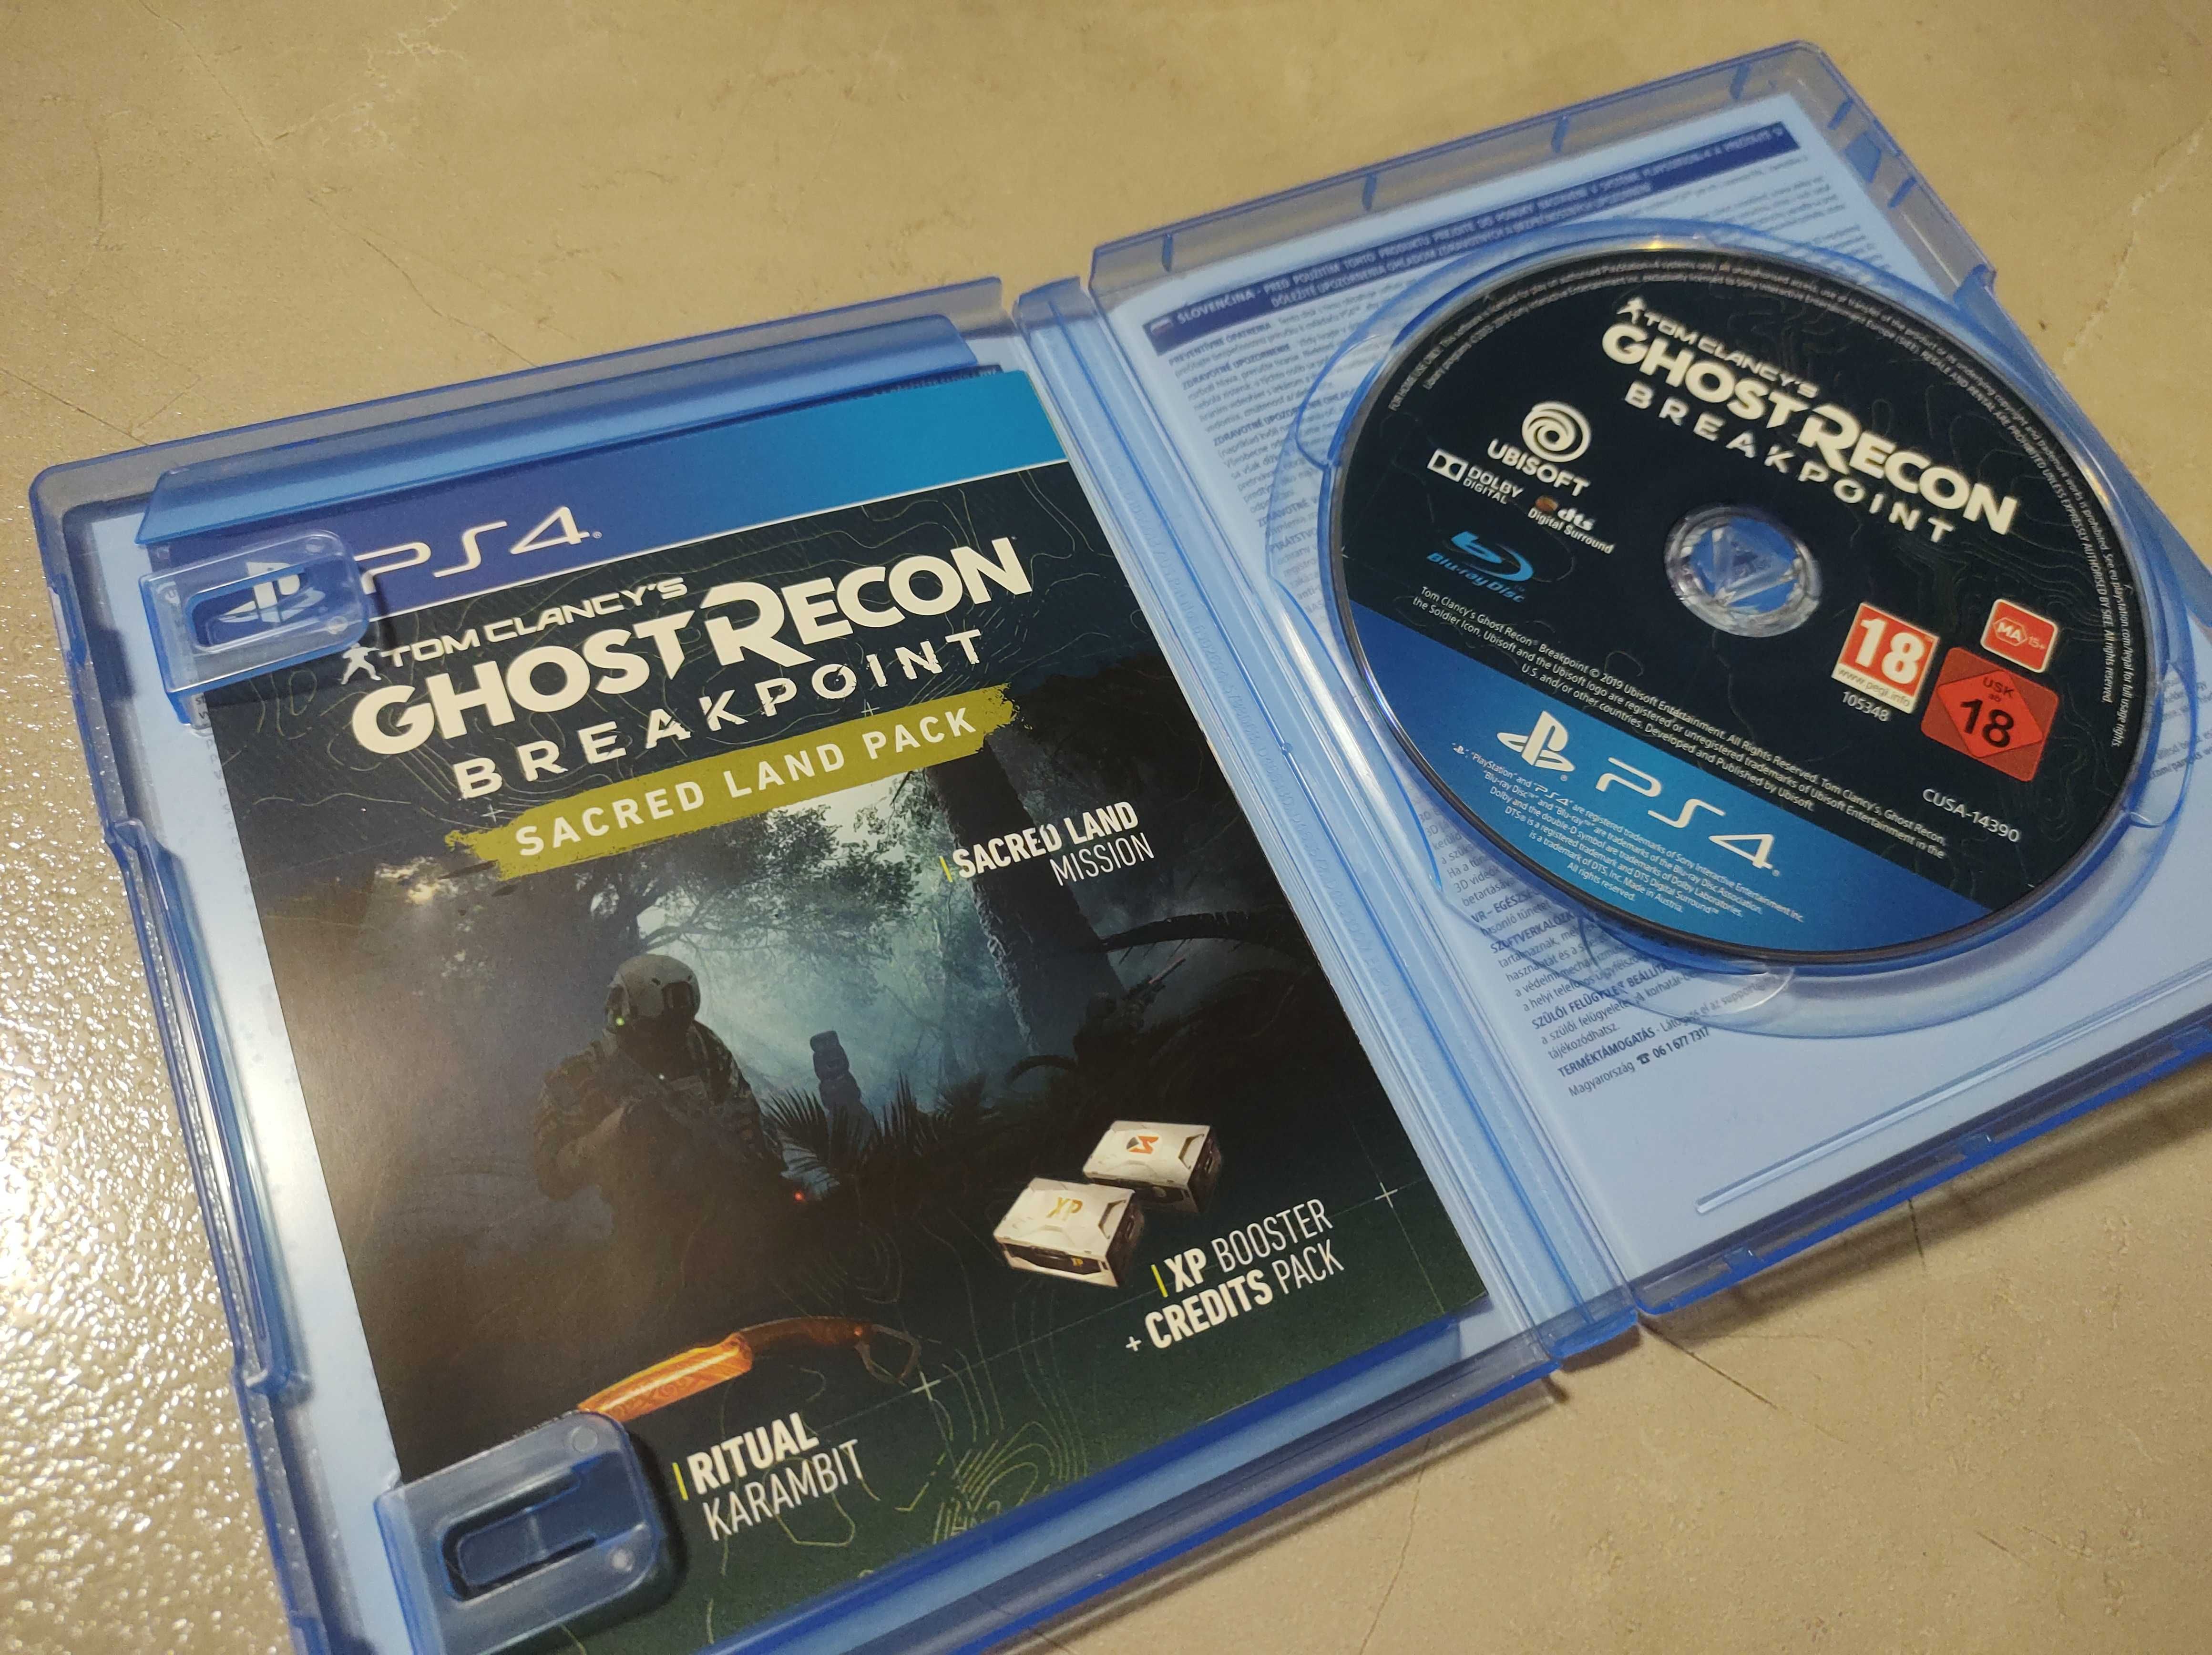 Gra Tom Clancys Ghost Recon Breakpoint Auroa edition PS4